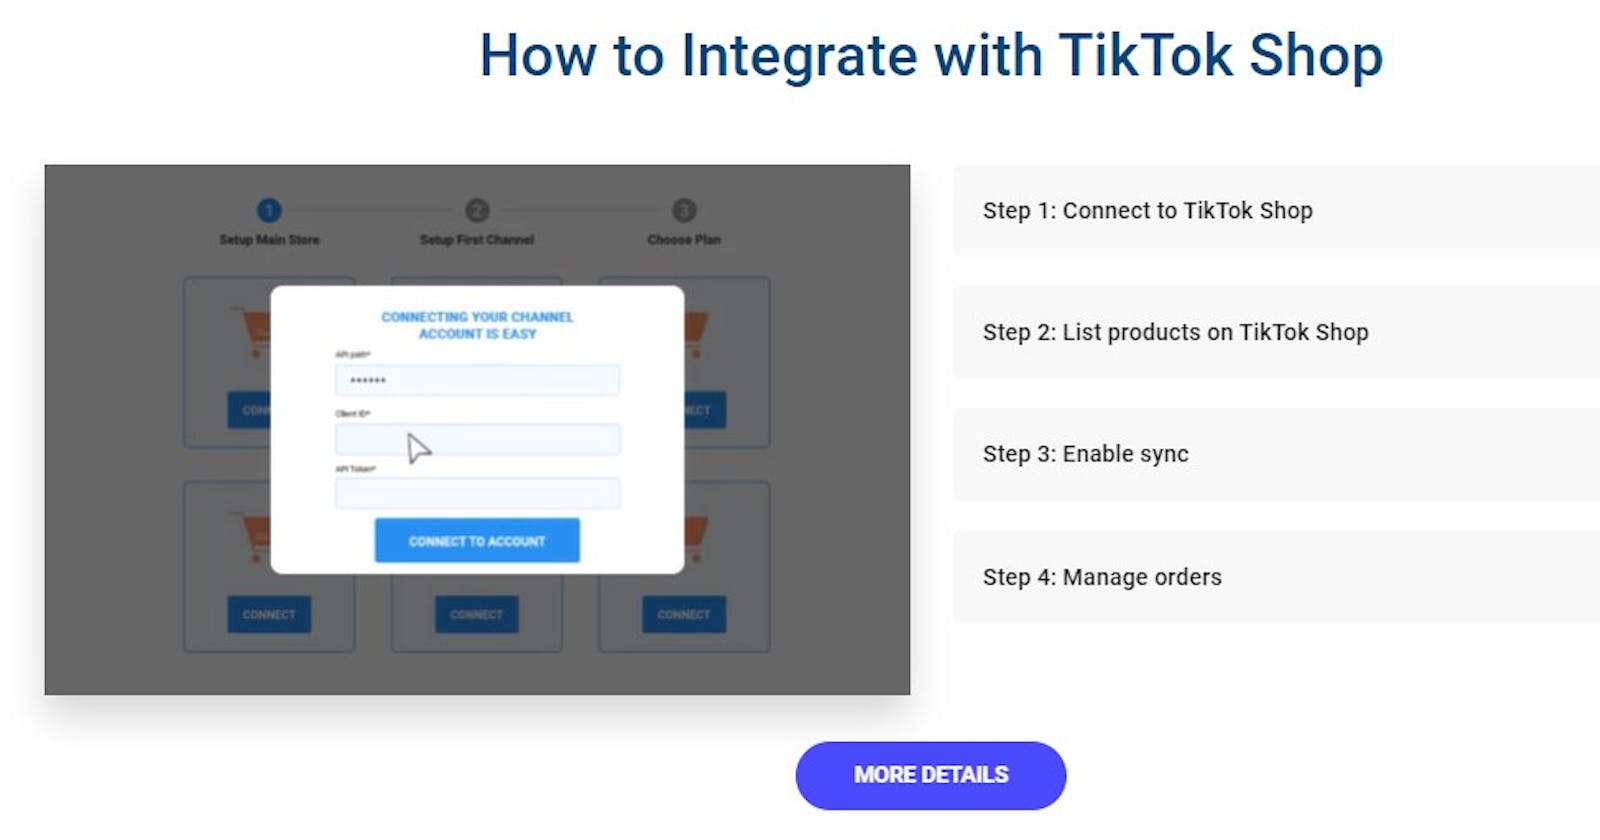 What is the TikTok integration?